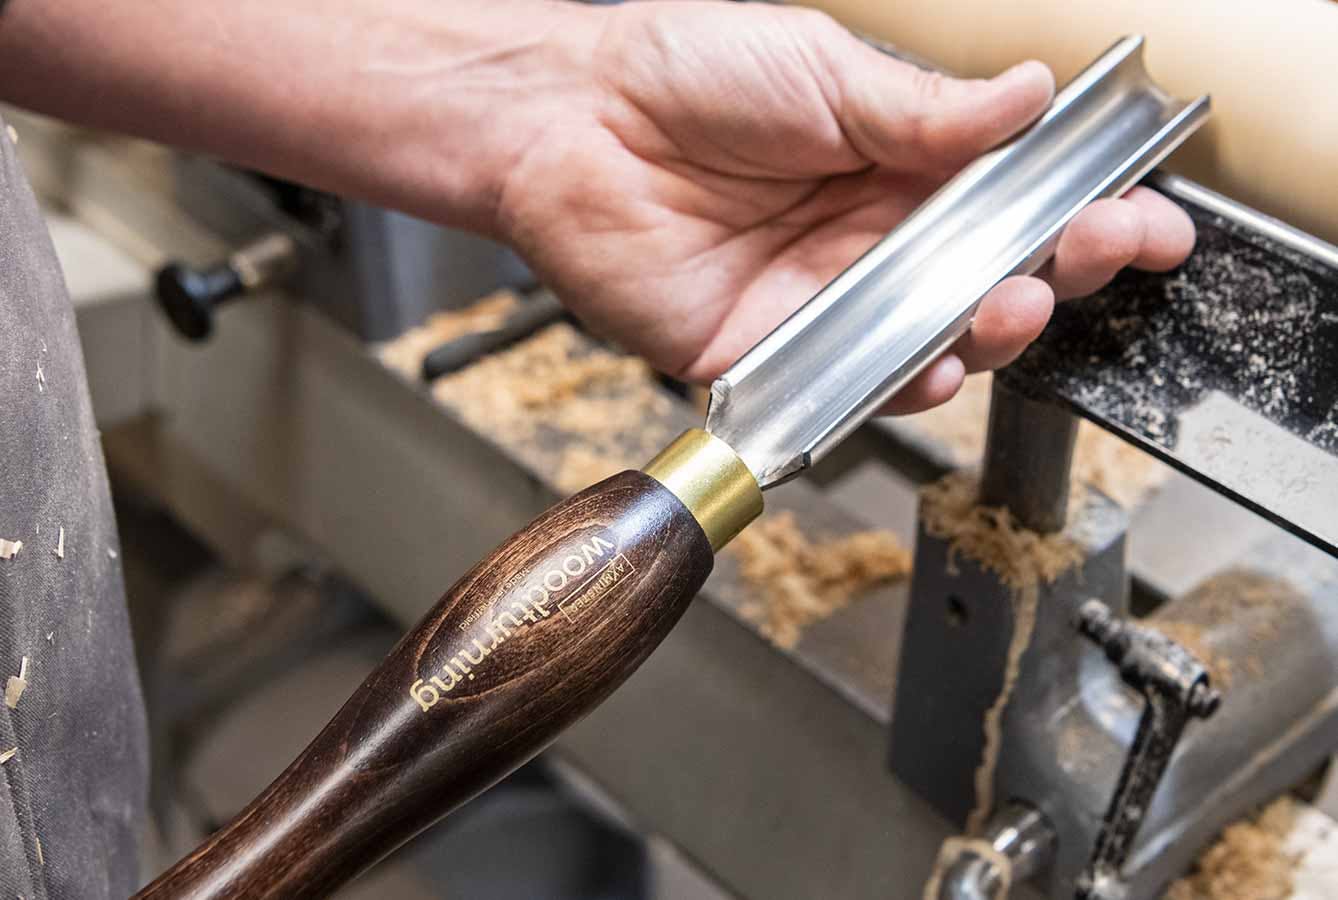 Spindle Roughing Gouge